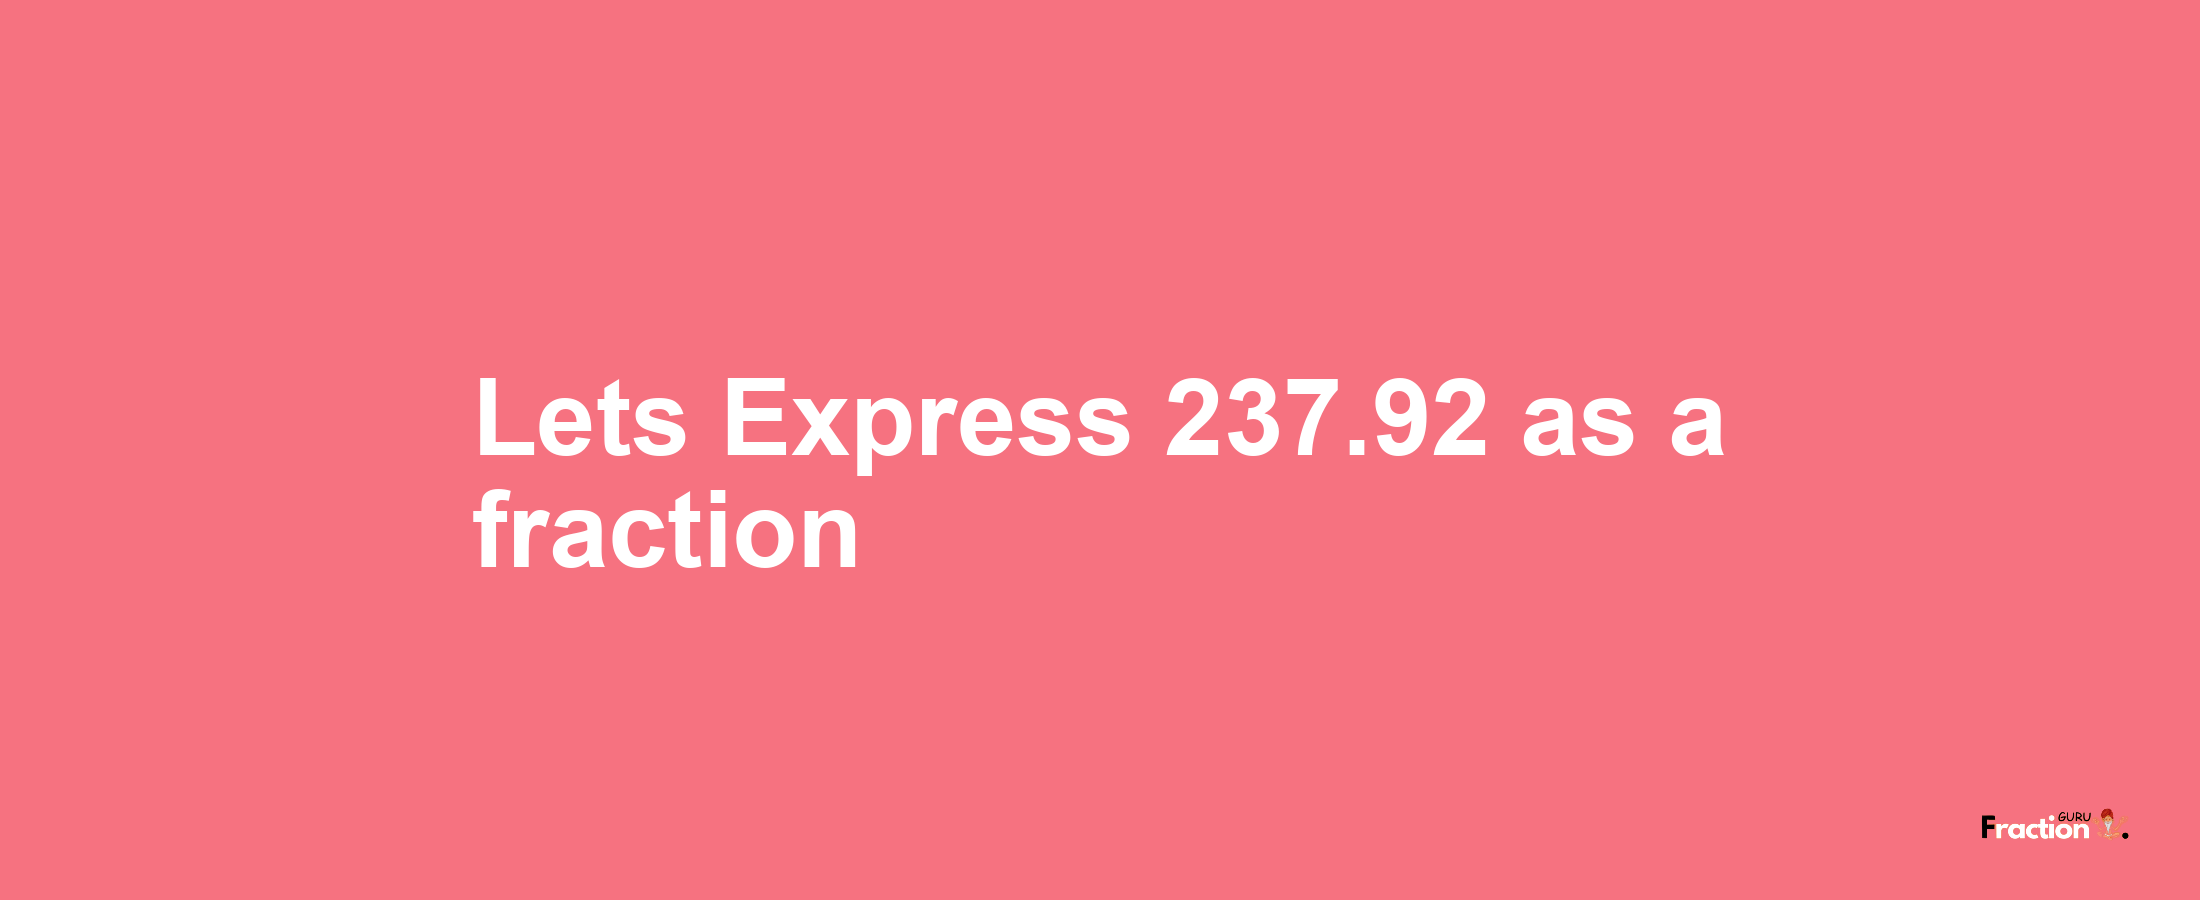 Lets Express 237.92 as afraction